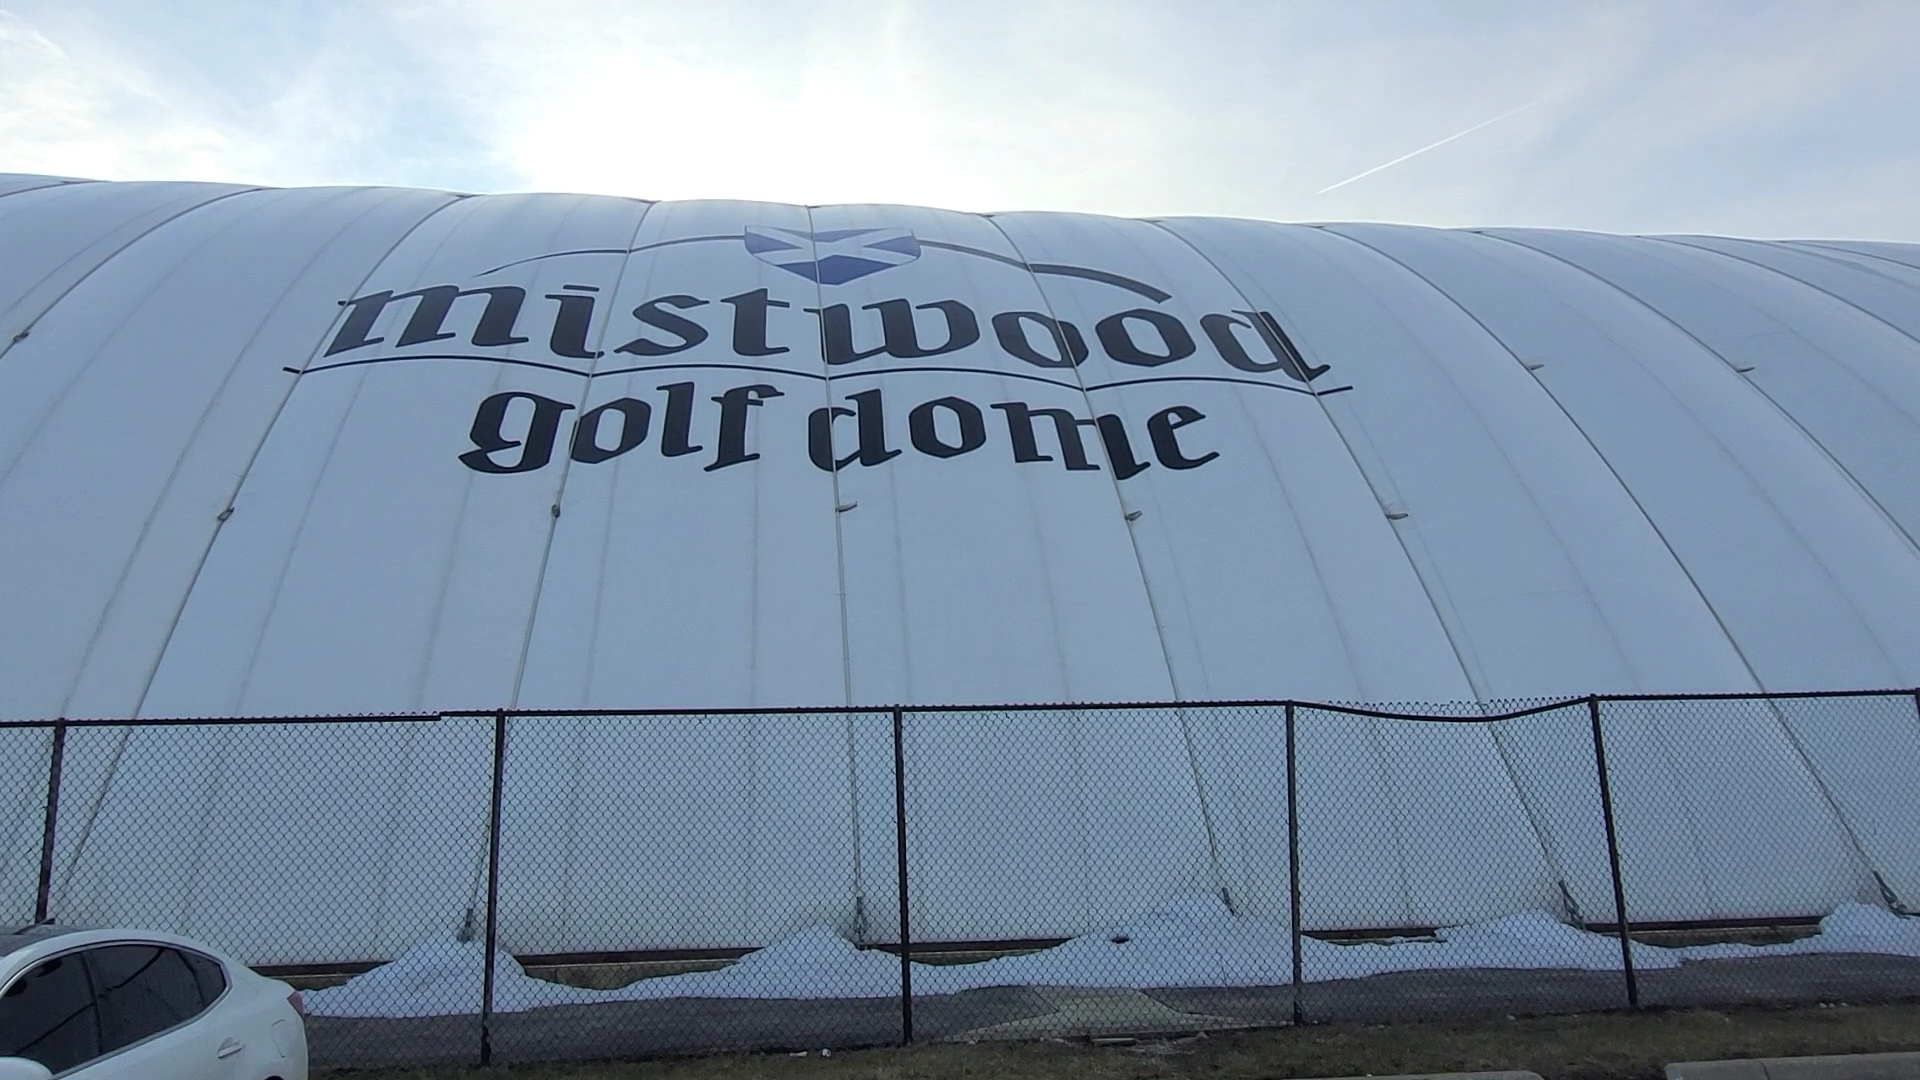 Mistwood Indoor Golf Dome Review | Bolingbrook, IL